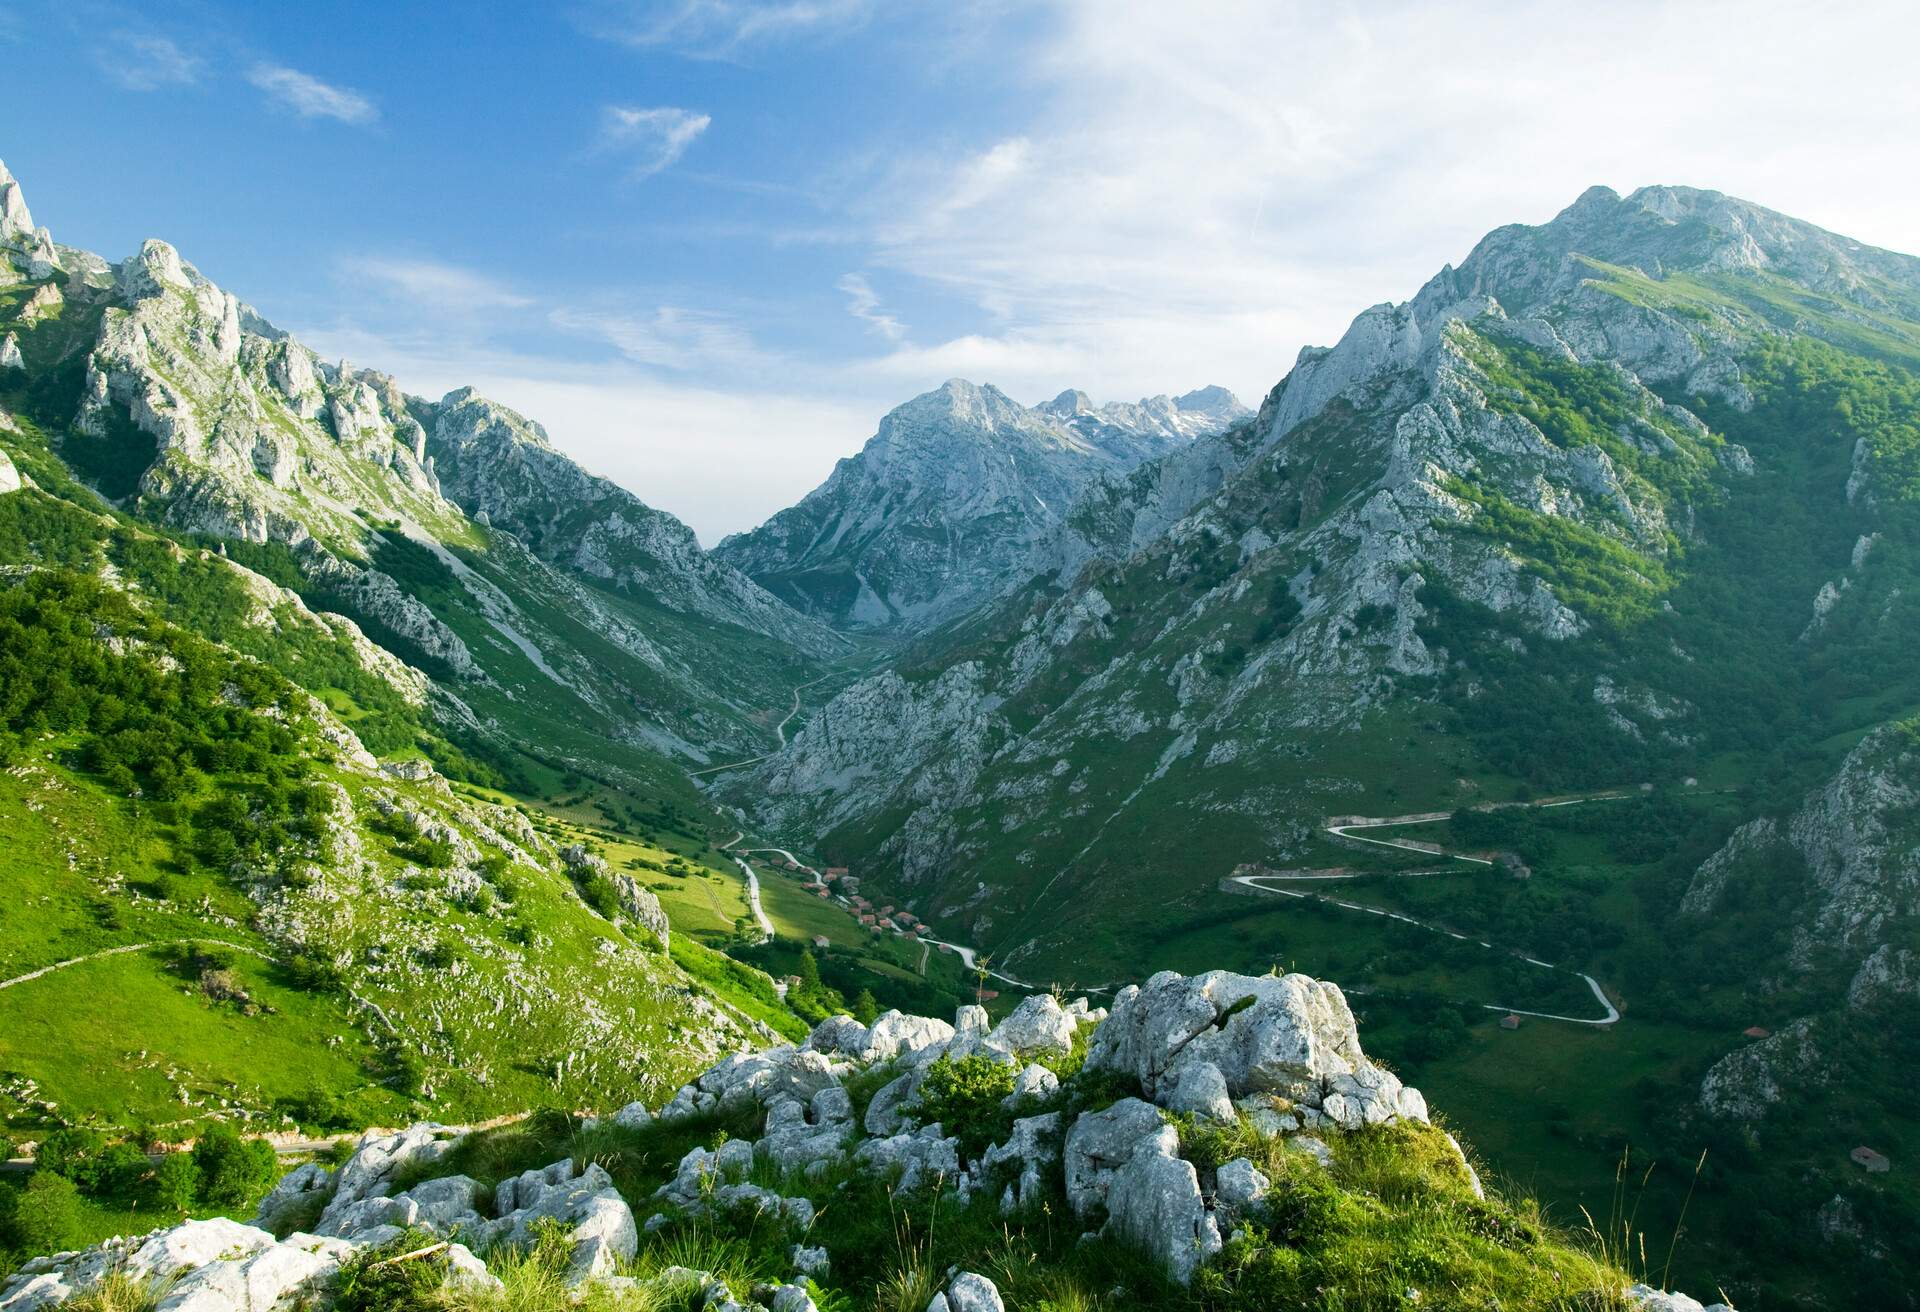 Landscape near Sotres in the Picos de Europa National Park northern Spain